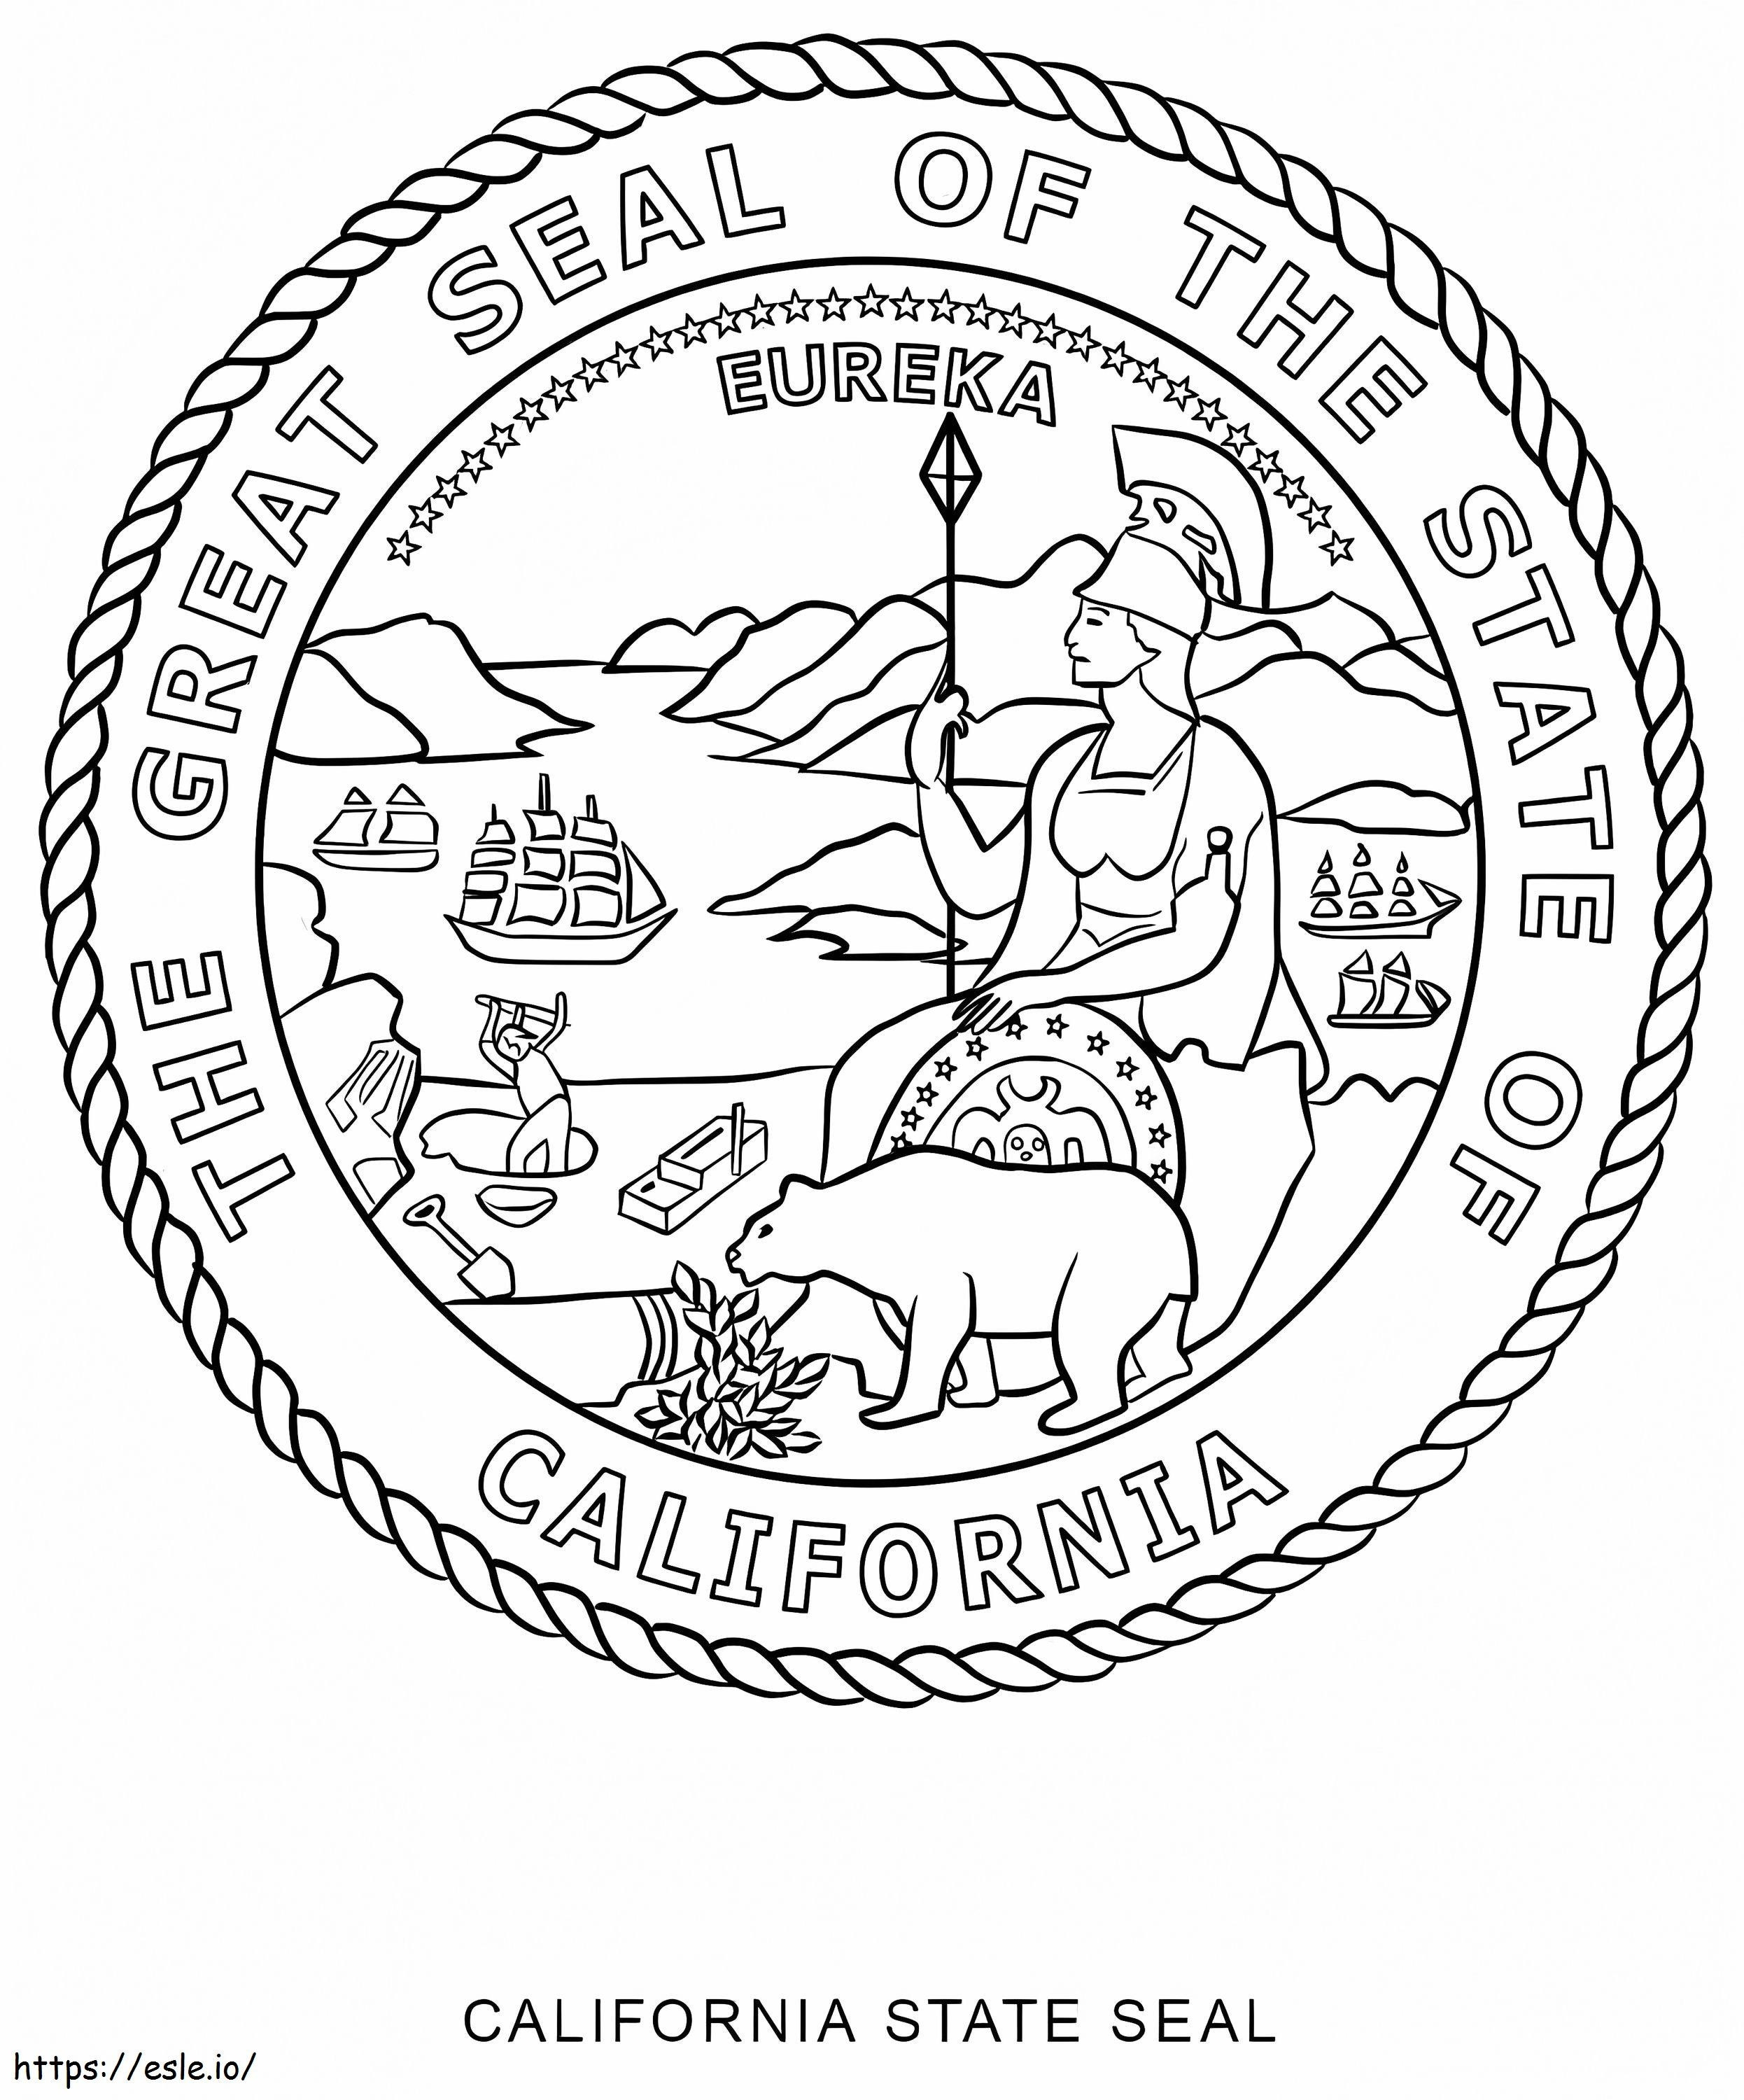 California State Seal coloring page